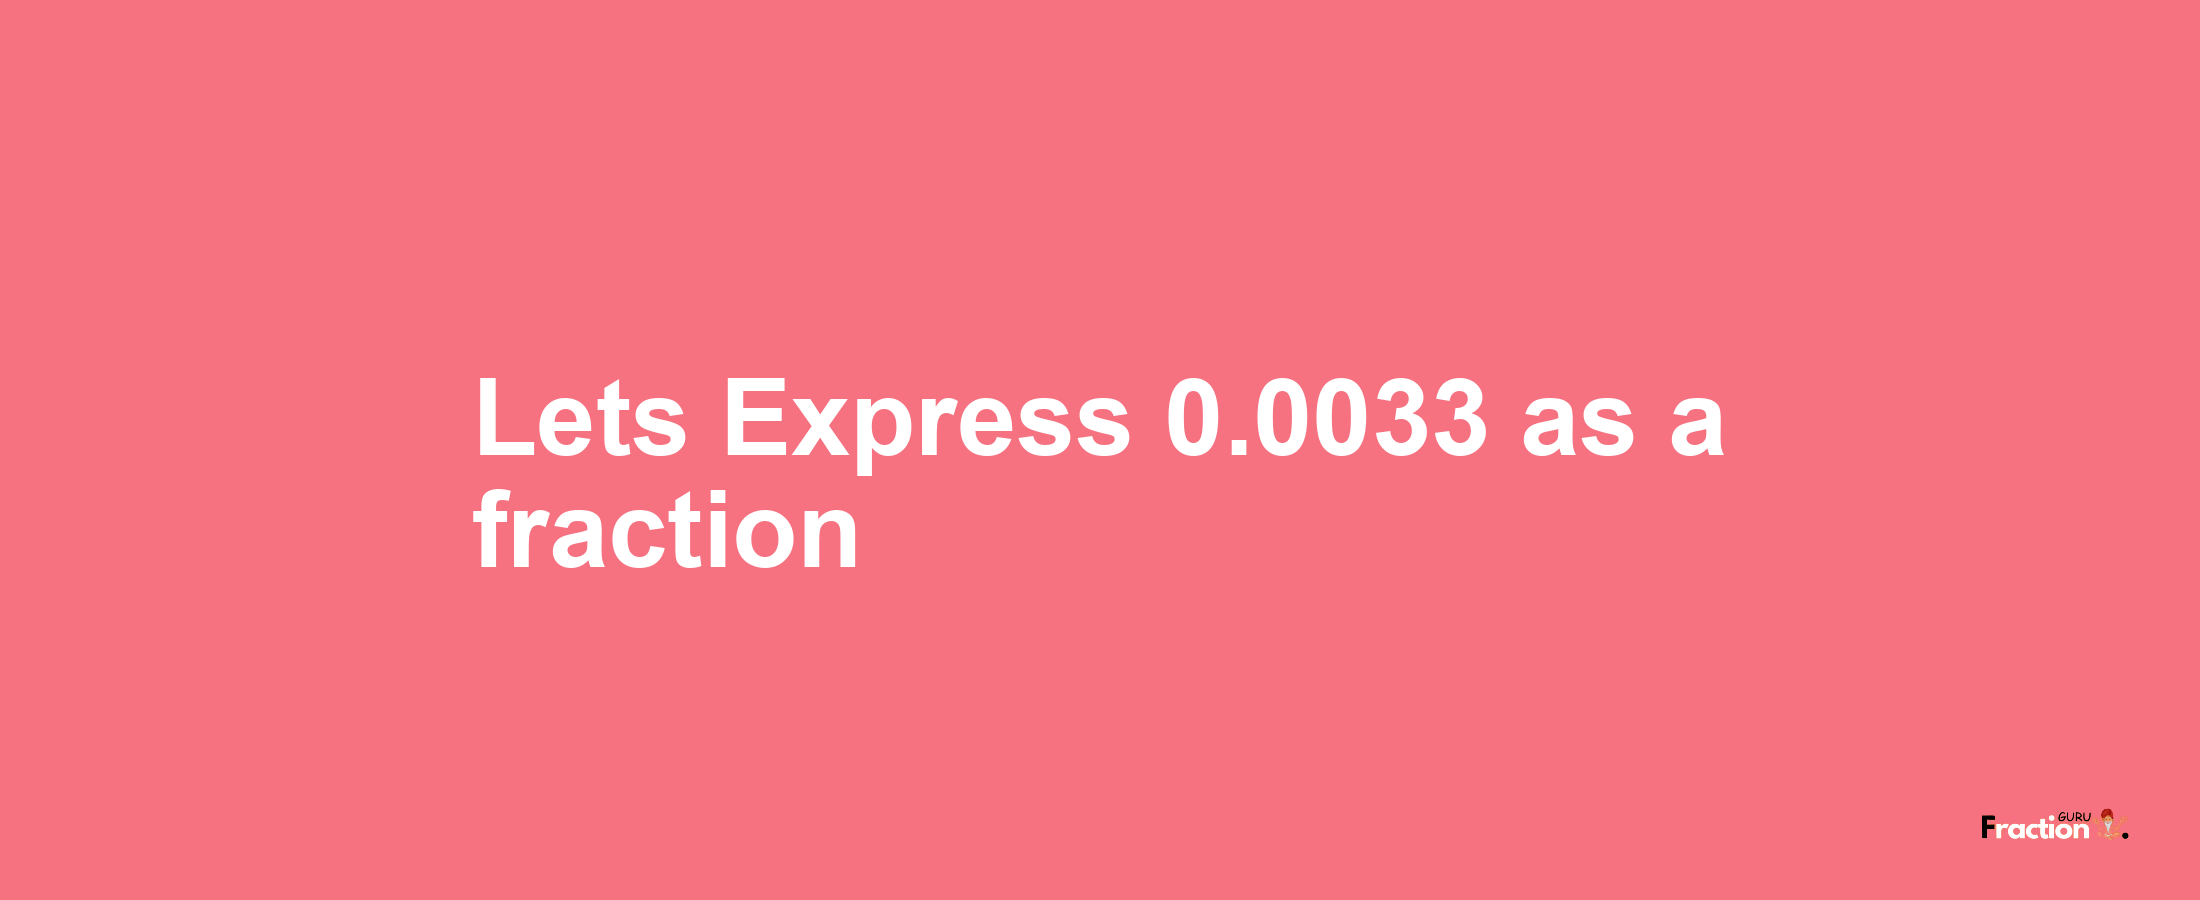 Lets Express 0.0033 as afraction